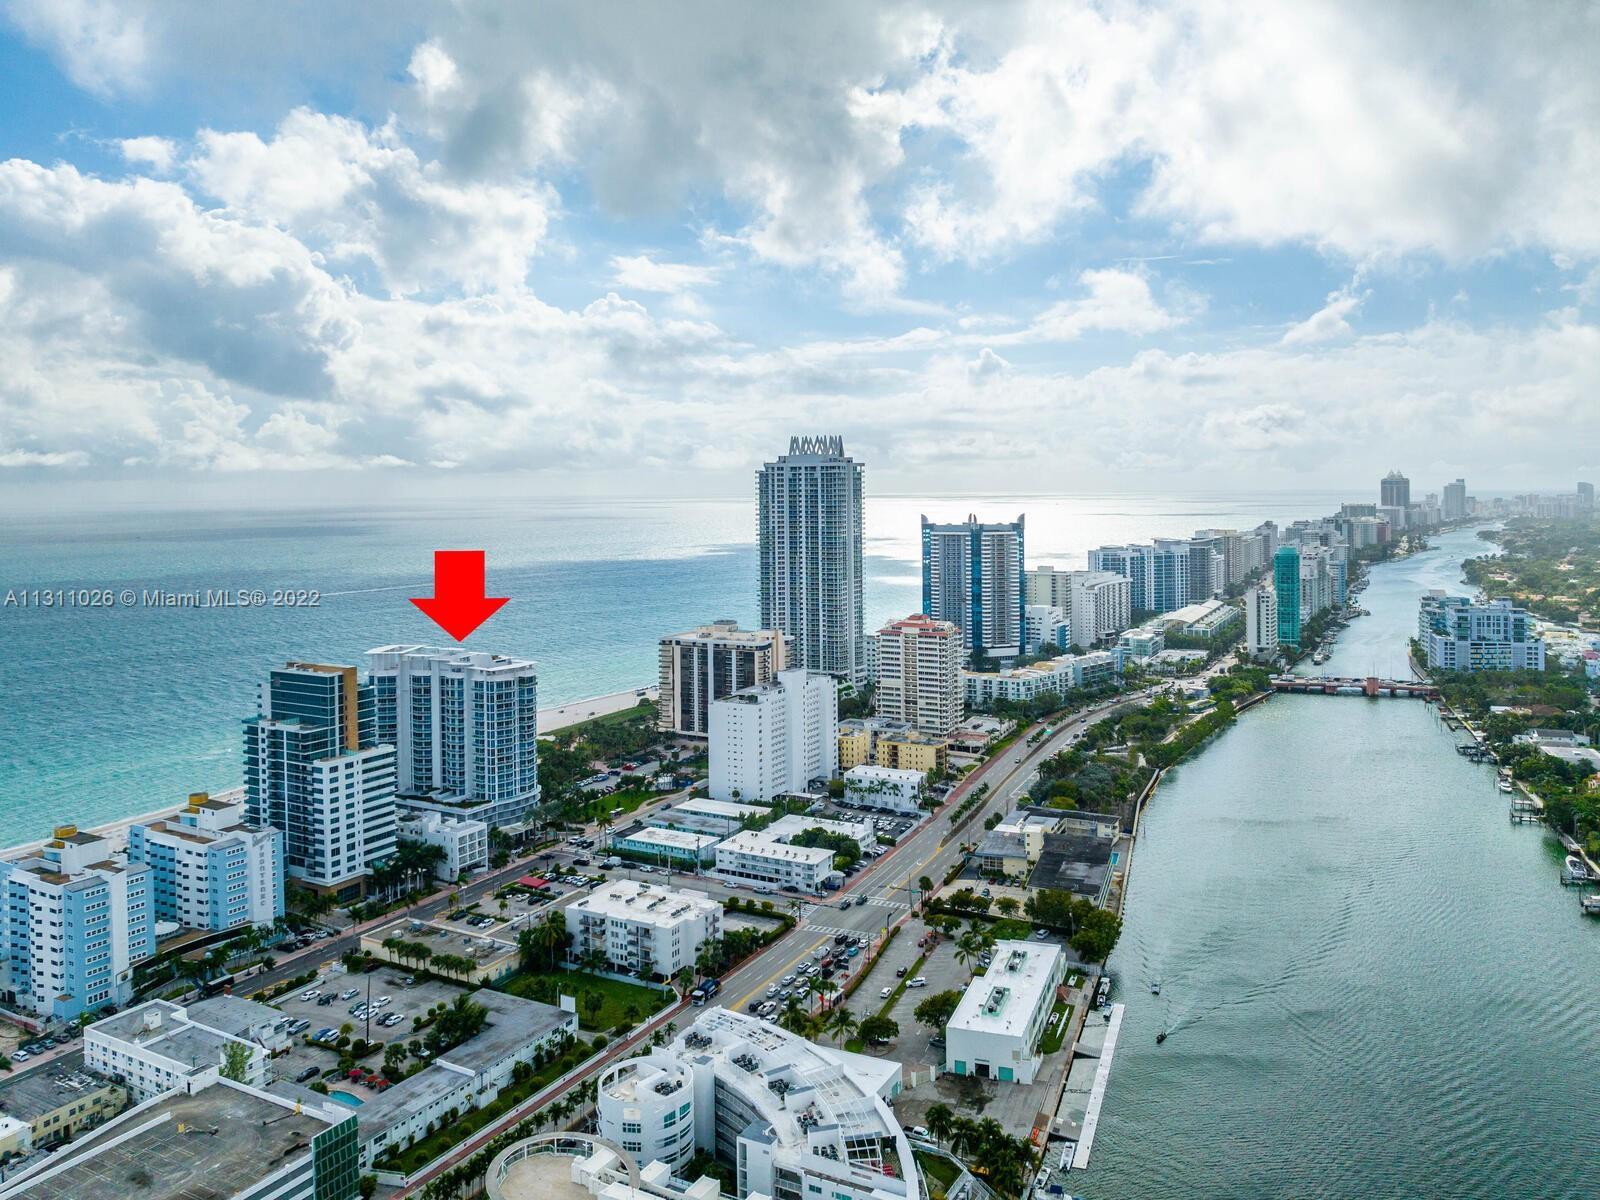 OCEANFRONT LUXURY BUILDING WITH UNOBSTRUCTED SPECTACULAR OCEAN, BAY & INTRACOASTAL VIEWS. SPACIOUS B